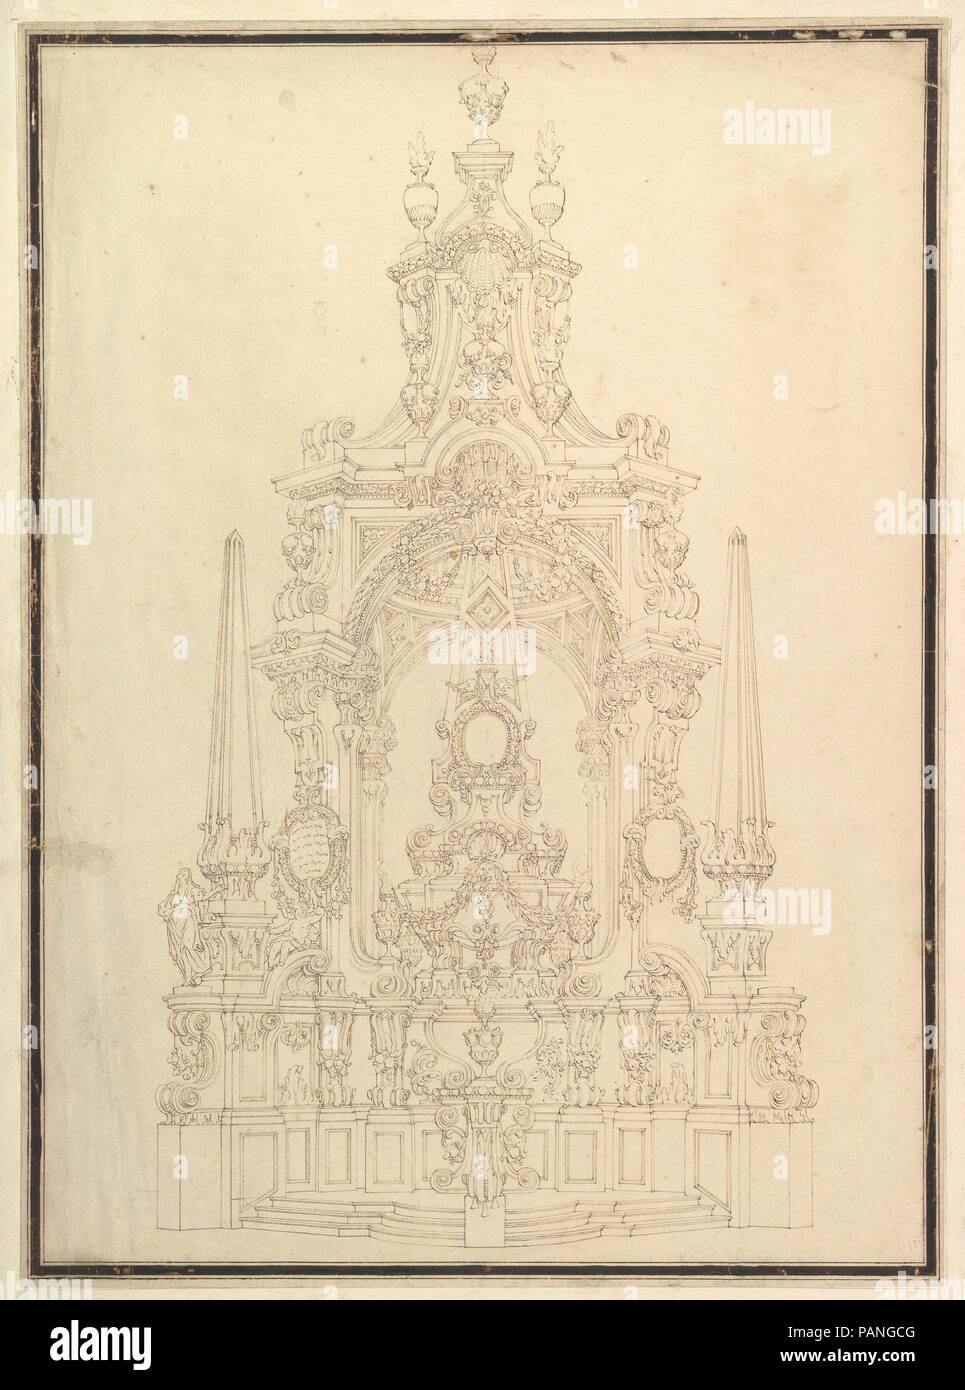 Elevation of a Catafalque: Obelisks at the Corners and One in Center. Artist: Workshop of Giuseppe Galli Bibiena (Italian, Parma 1696-1756 Berlin). Dimensions: 23-1/2 x 17-3/8 in.  (59.7 x 44.1 cm). Date: ca. 1720-40. Museum: Metropolitan Museum of Art, New York, USA. Stock Photo